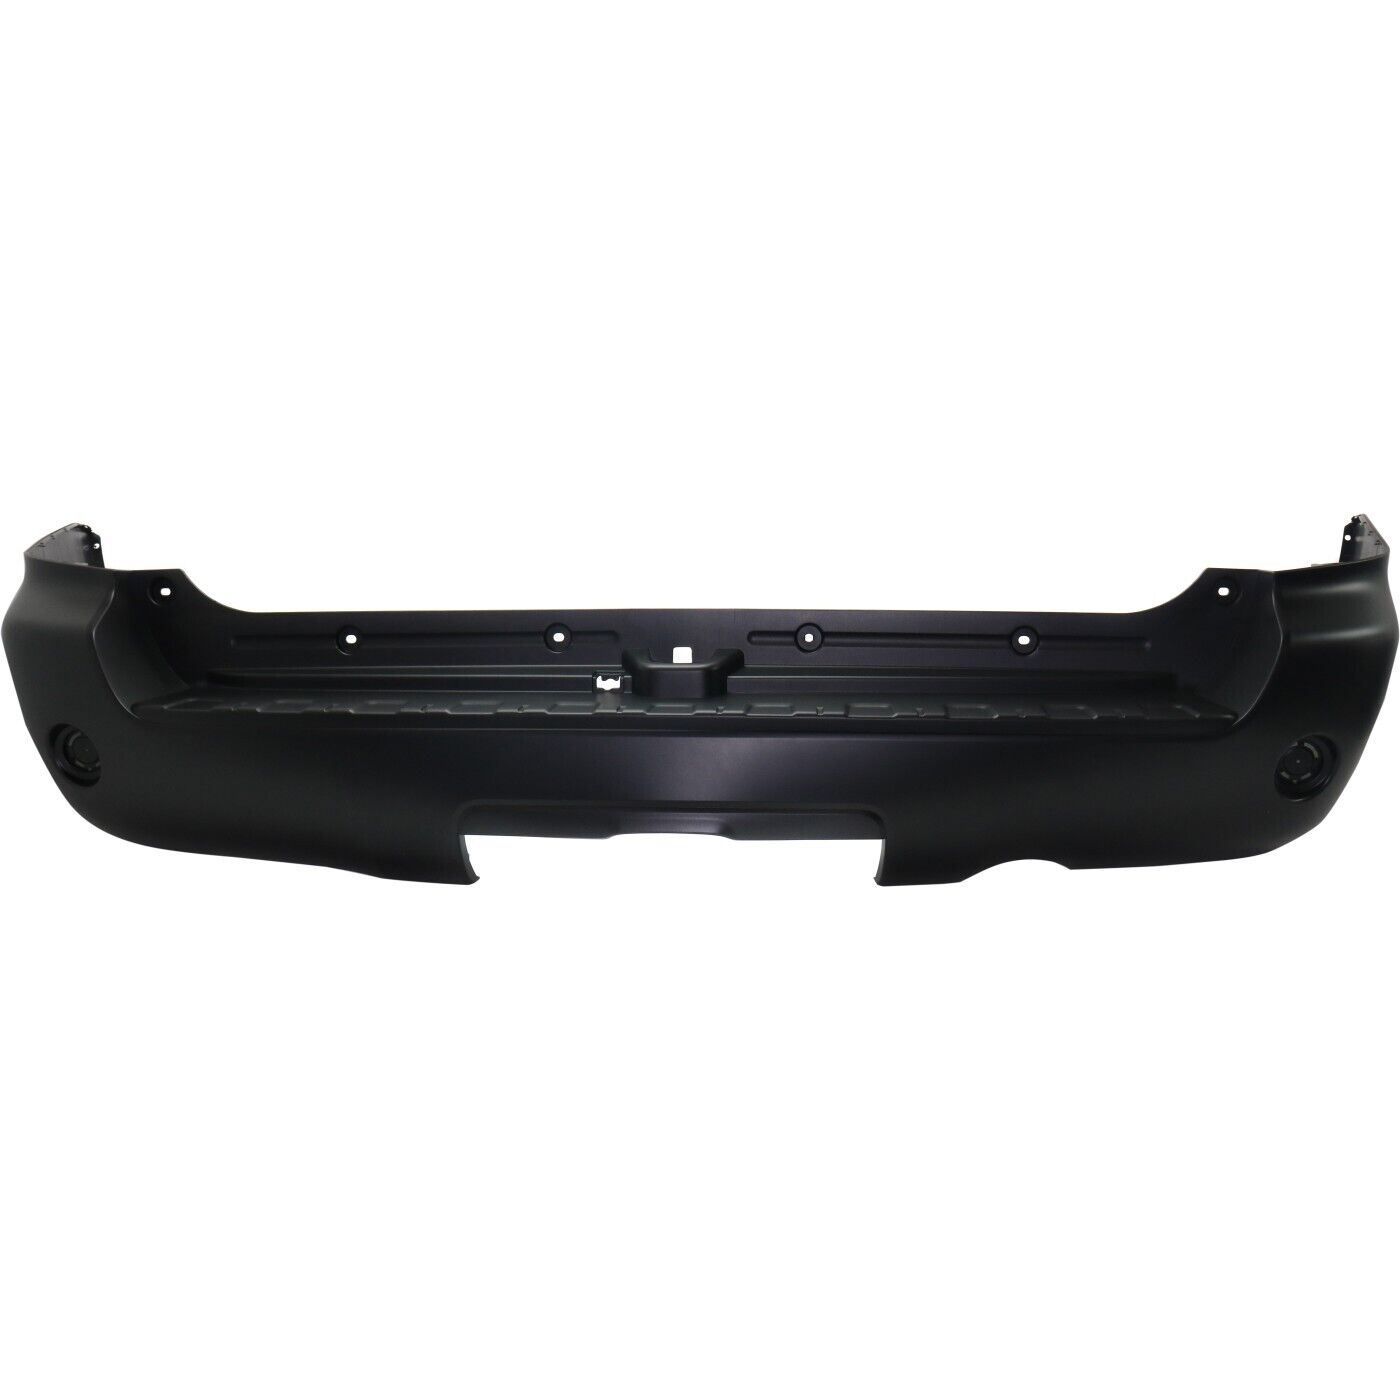 2008-2022 TOYOTA SEQUOIA; Rear Bumper Cover; SR5 w/o Sensor Painted to Match